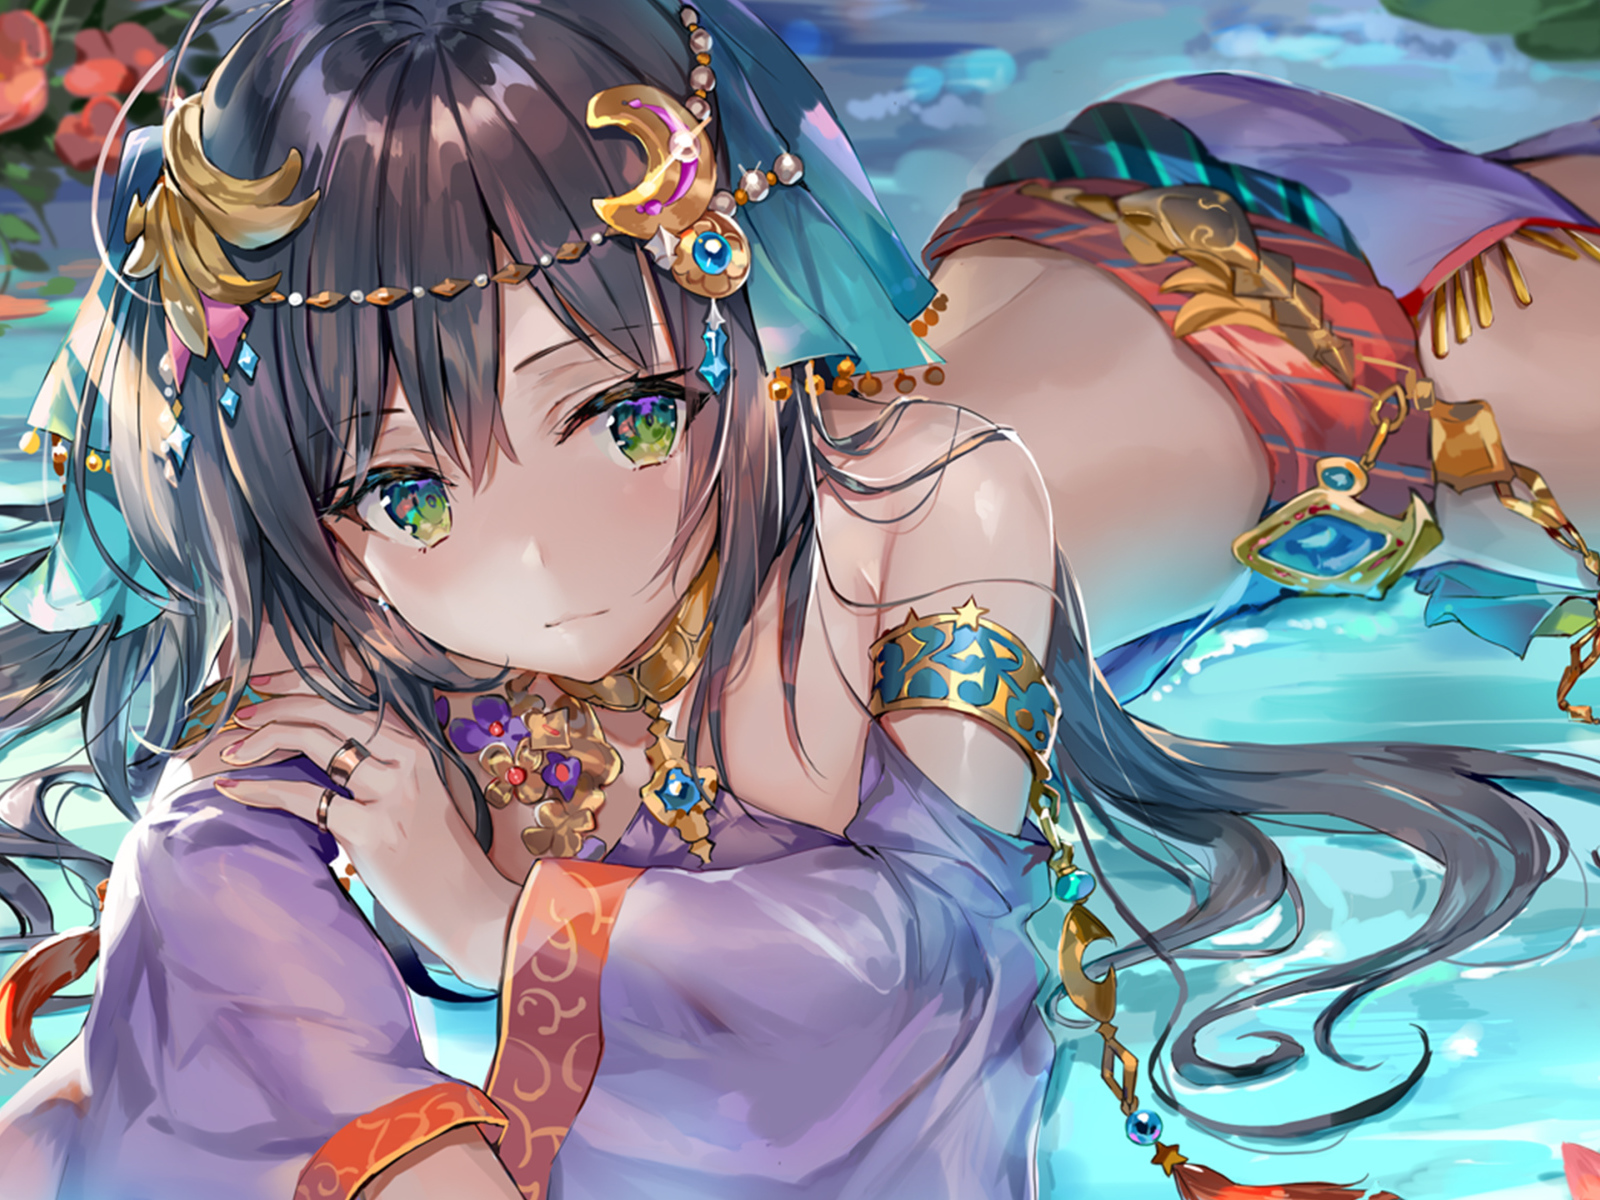 Beautiful anime girl with decorations on the body Desktop wallpaper 1600x1200